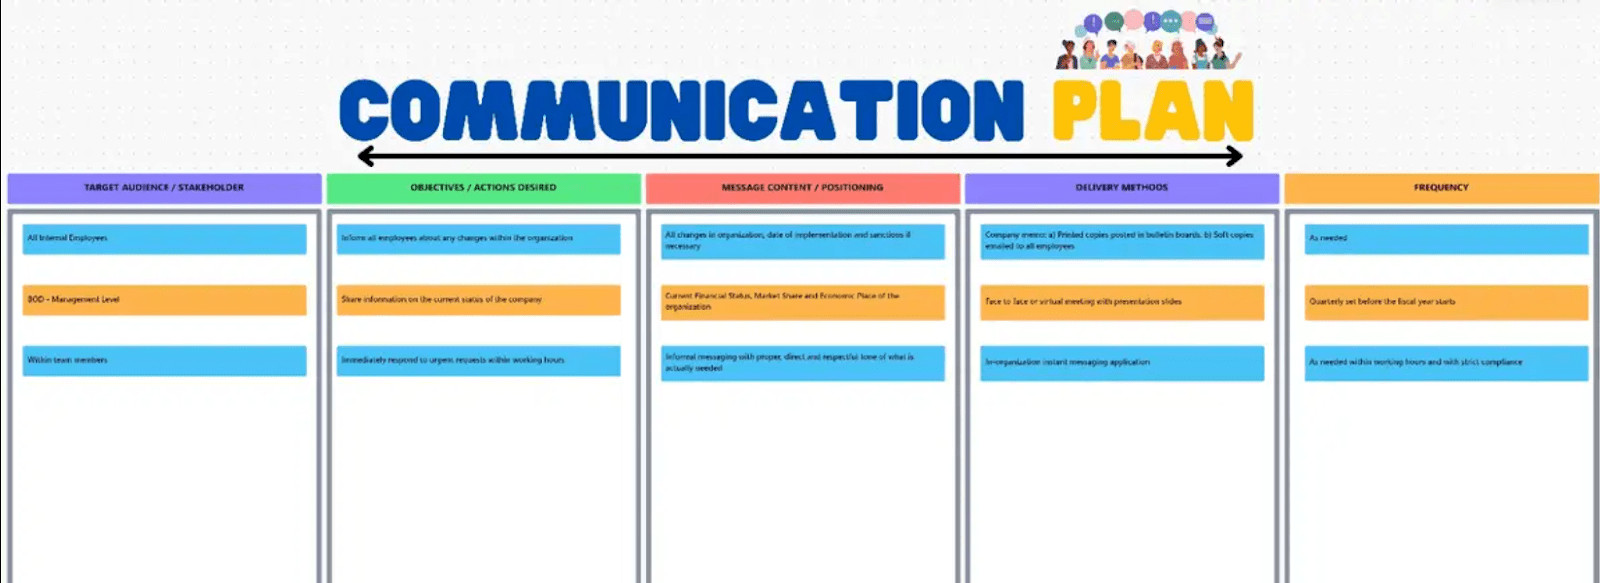 Outline your communication startegies, goals, channels, and frequency with the Communication Plan Whiteboard Template by ClickUp